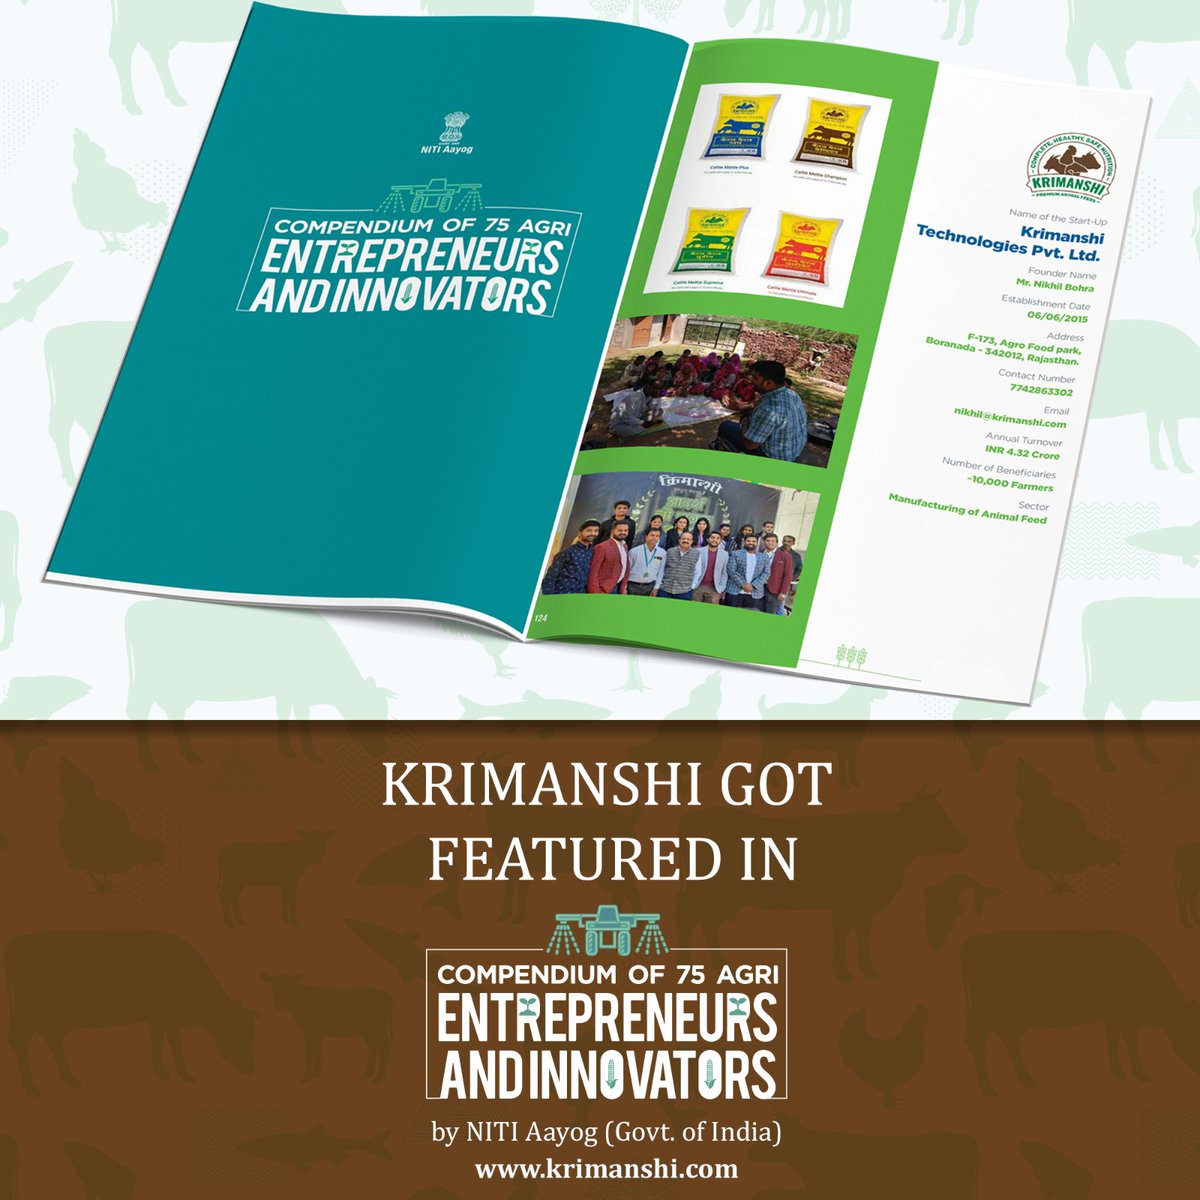 We are excited to be a part of the Compendium of 75 Agri Entrepreneurs and Innovators by NITI Aayog Govt. of India which is aimed at transforming the agriculture sector into a modernized, sustainable, and export-oriented industry.

#krimanshi #nitiaayog #startupindia #cattlefeed